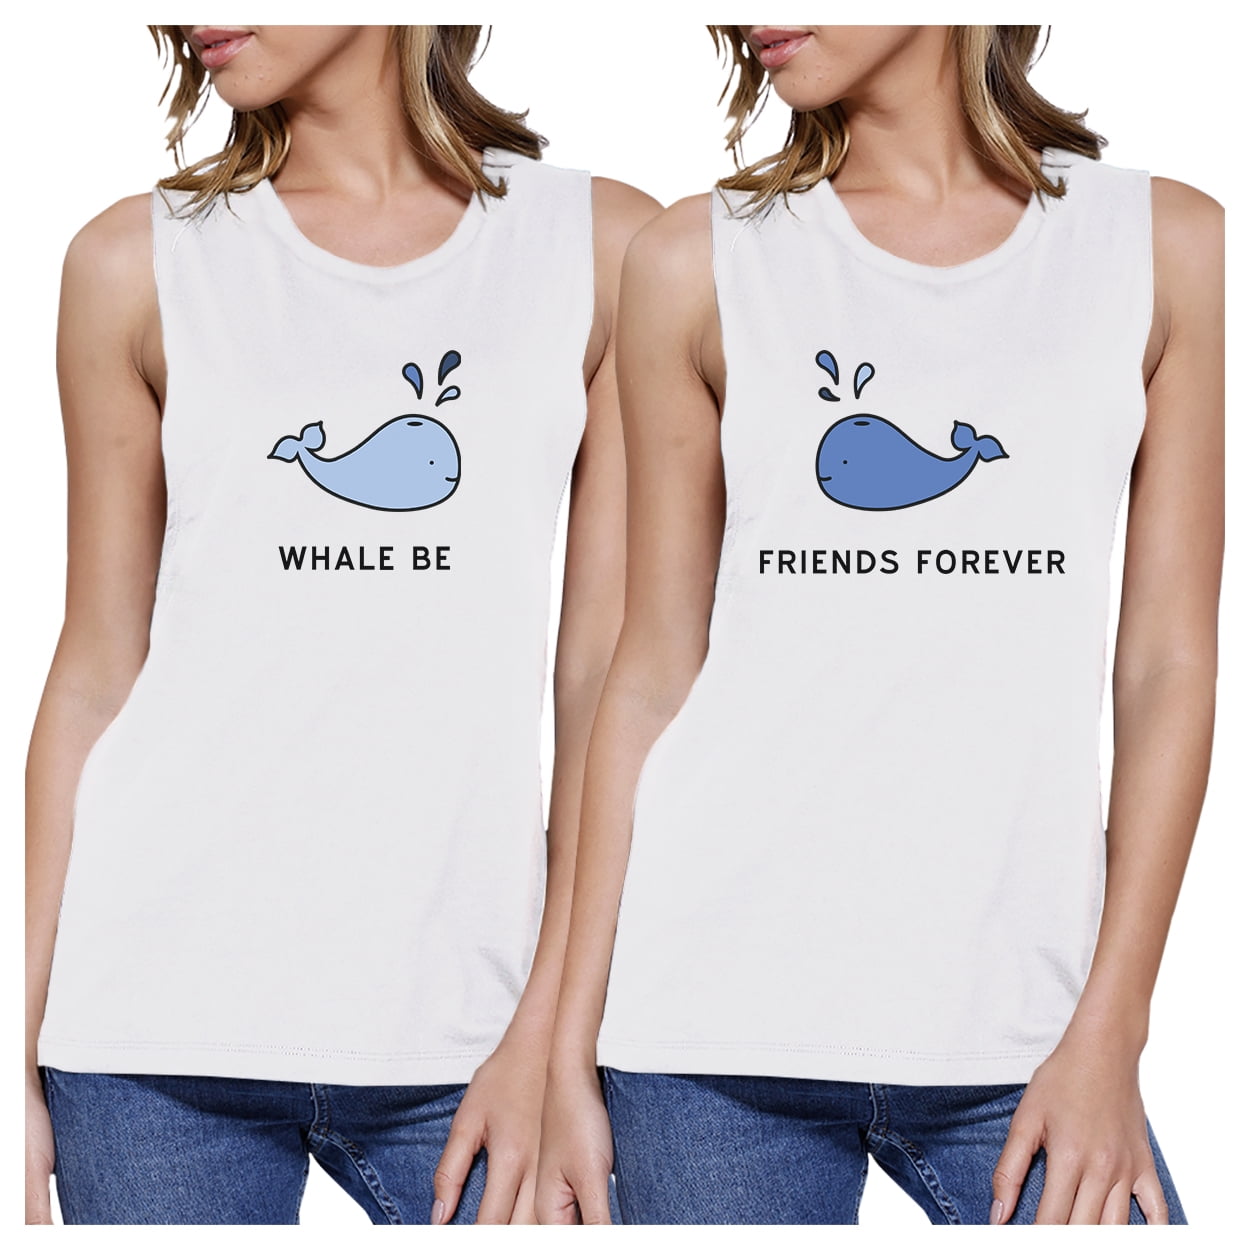 365 Printing Whale Be Friend Forever Bff Matching White Summer Muscle Tops Walmart Com Walmart Com